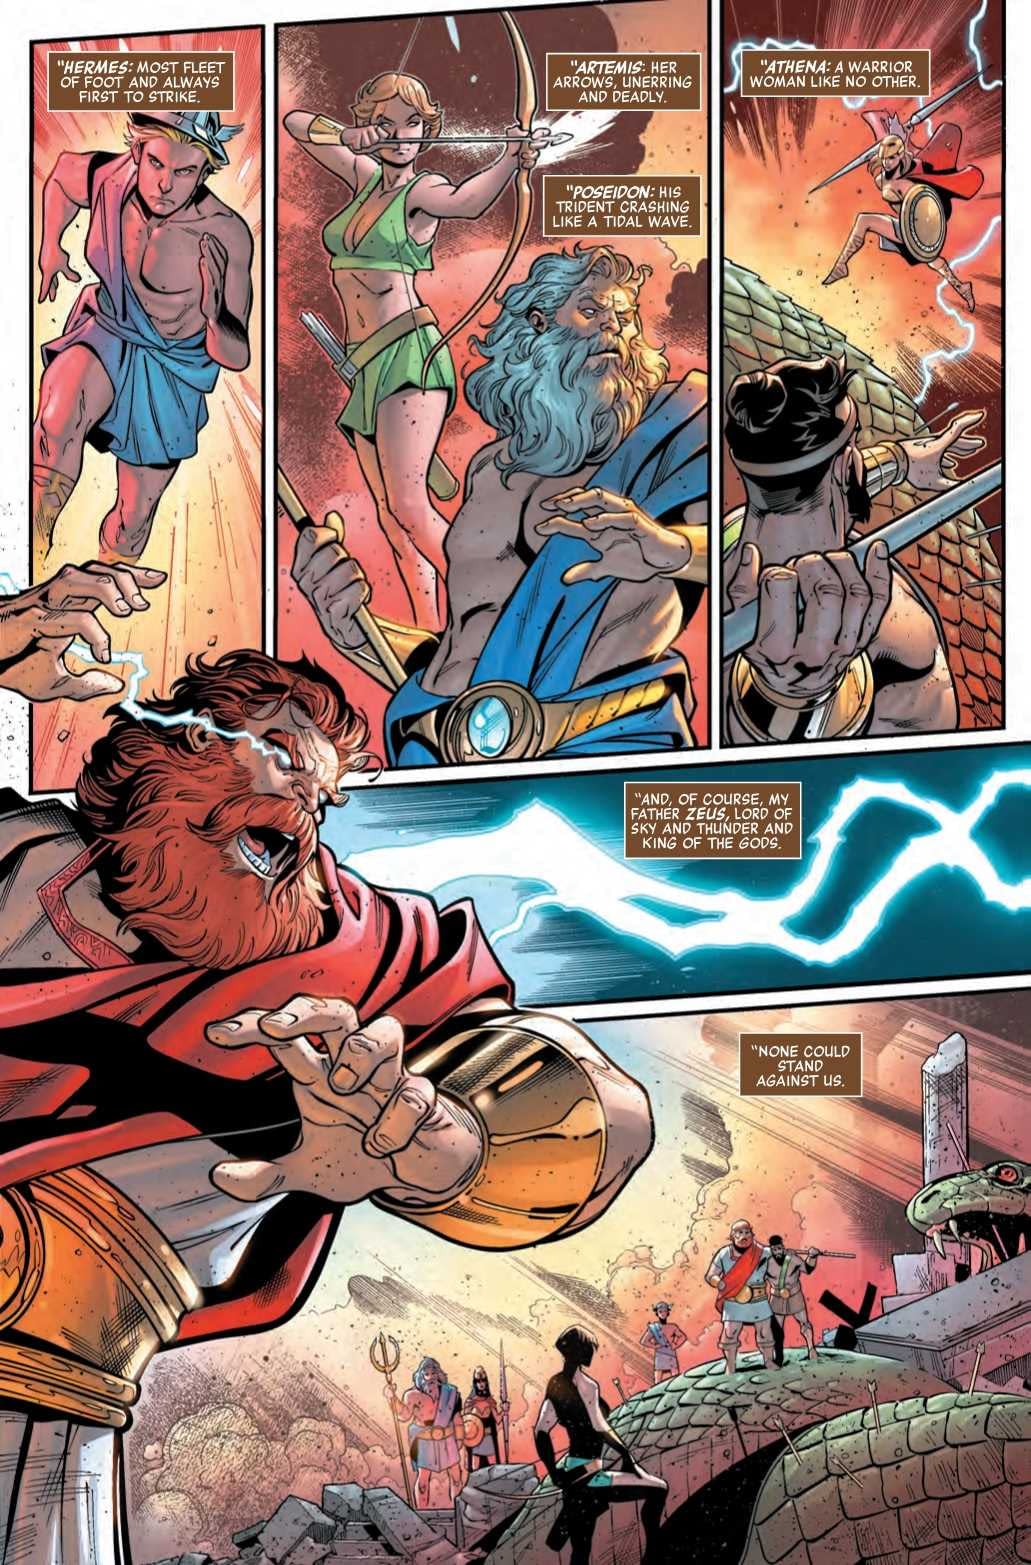 For Hercules, Does Pride Goeth Before a Fall in Next Week's Avengers No Road Home #1?